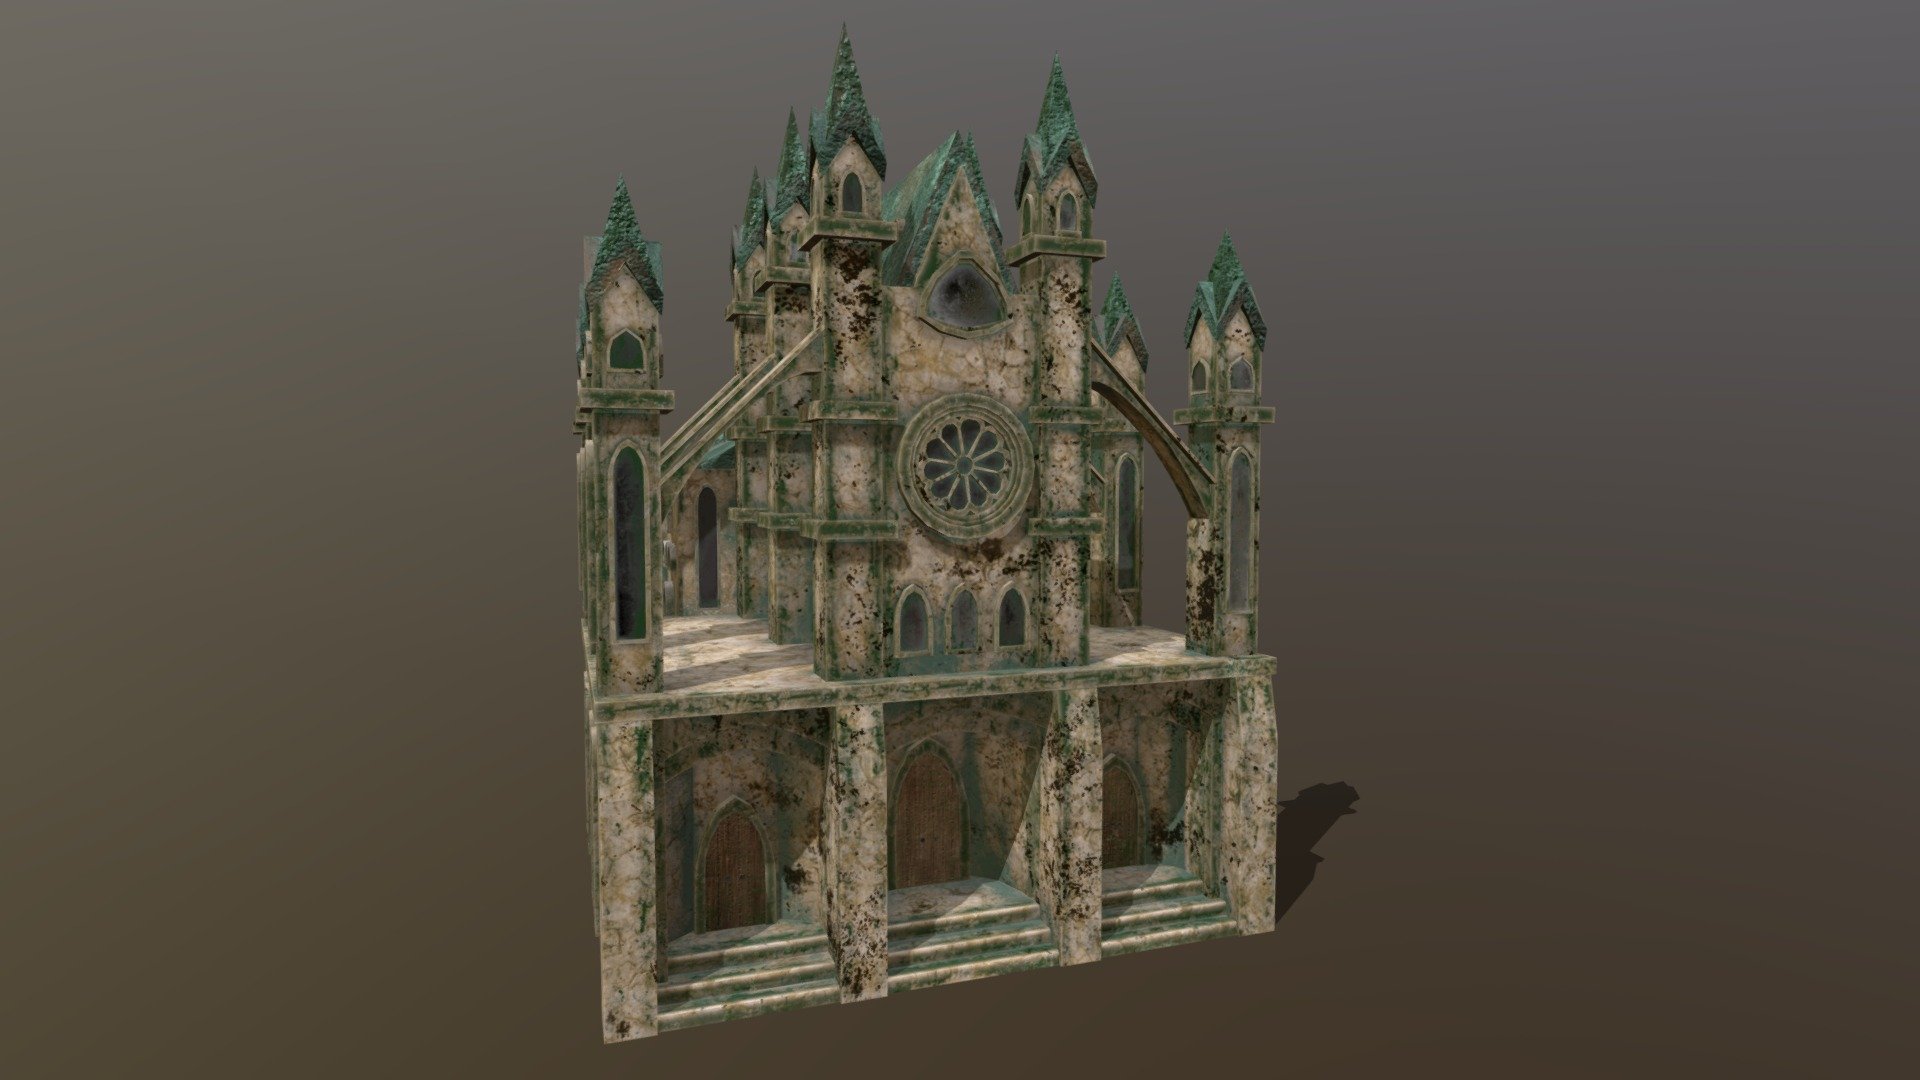 This is a Neo-Gothic Church that I created for an university assignment. Hope you like it! - Neo-Gothic Church - 3D model by serenissime 3d model